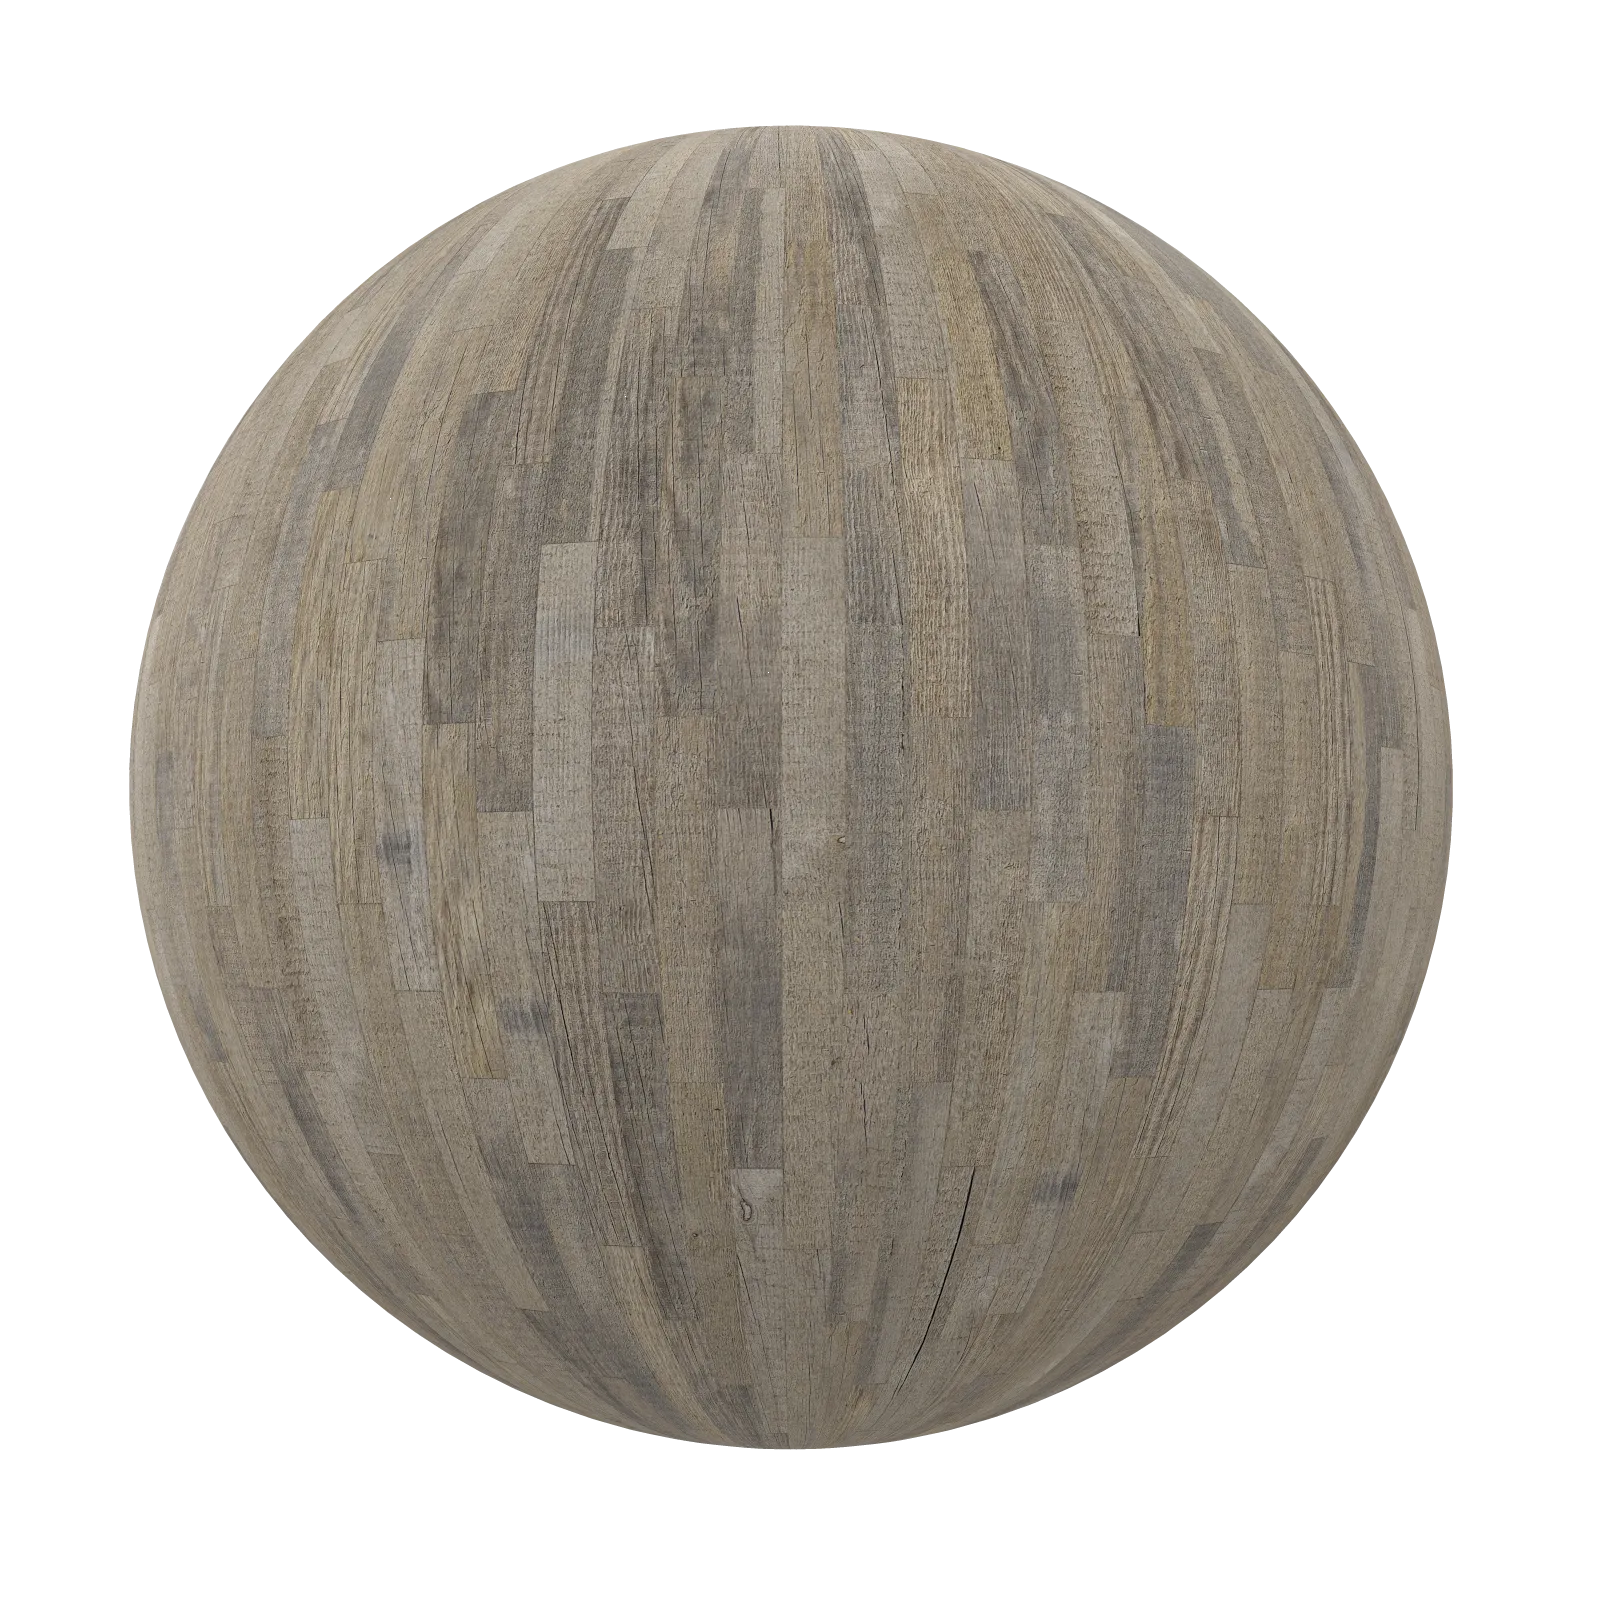 TEXTURES – WOOD – Old Wood Tiles 17